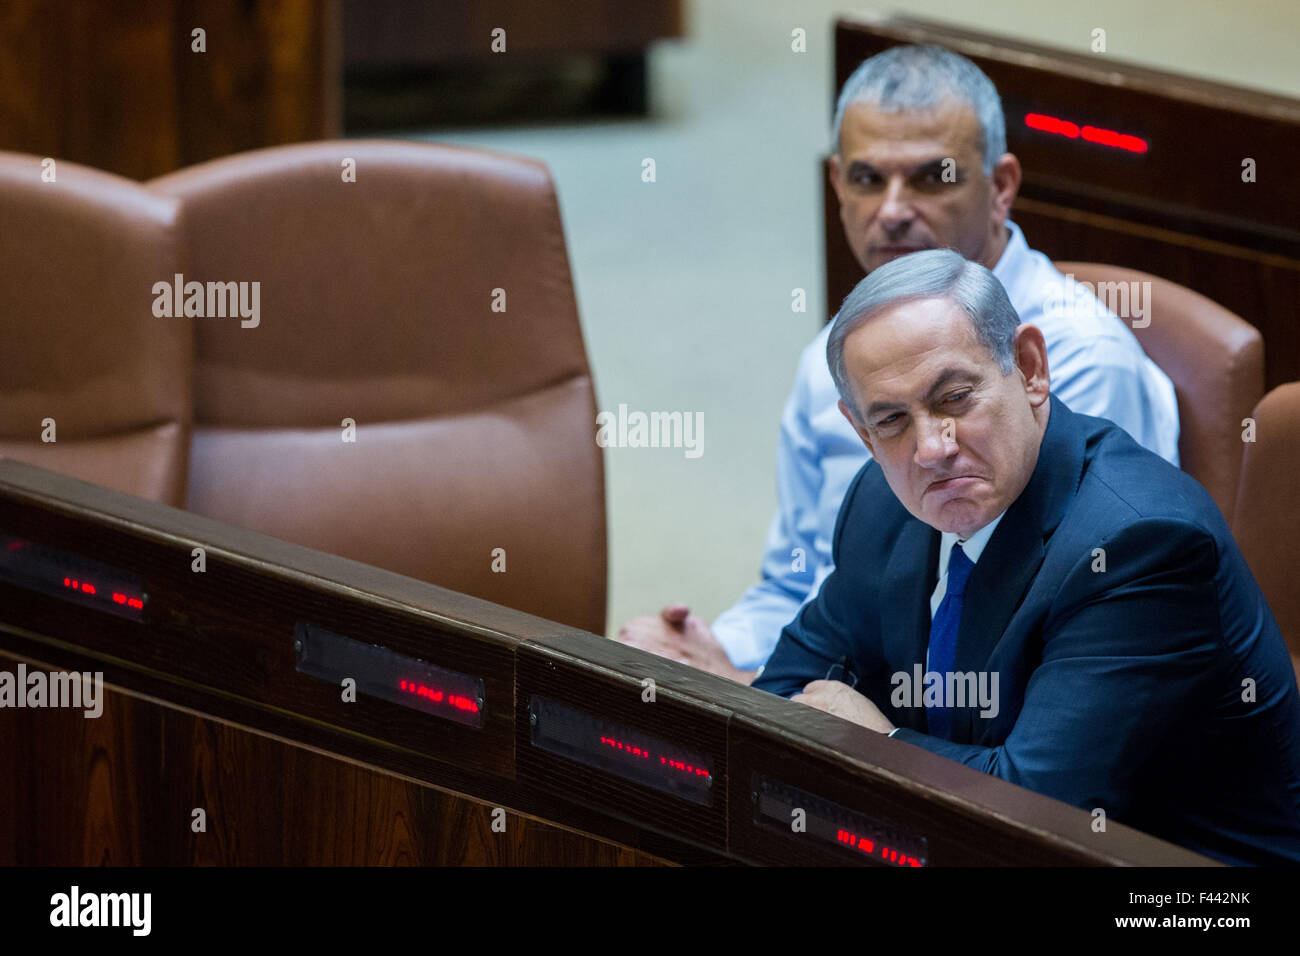 (151014) -- JERUSALEM, Oct. 14, 2015 (Xinhua) -- Israeli Prime Minister Benjamin Netanyahu (R) attends a special session at the Knesset (Israeli parliament) in Jerusalem, on Oct. 14, 2015. Israeli Prime Minister Benjamin Netanyahu is pushing for more security measures to fight a rising wave of violence, amid one of the most lethal days of attacks against Israelis in the past month. Netanyahu convened his top brass of ministers, a forum known as the security cabinet, to discuss further measures to curtail the wave of terror attacks, with right wing ministers pushing for a closure on Palestinian Stock Photo